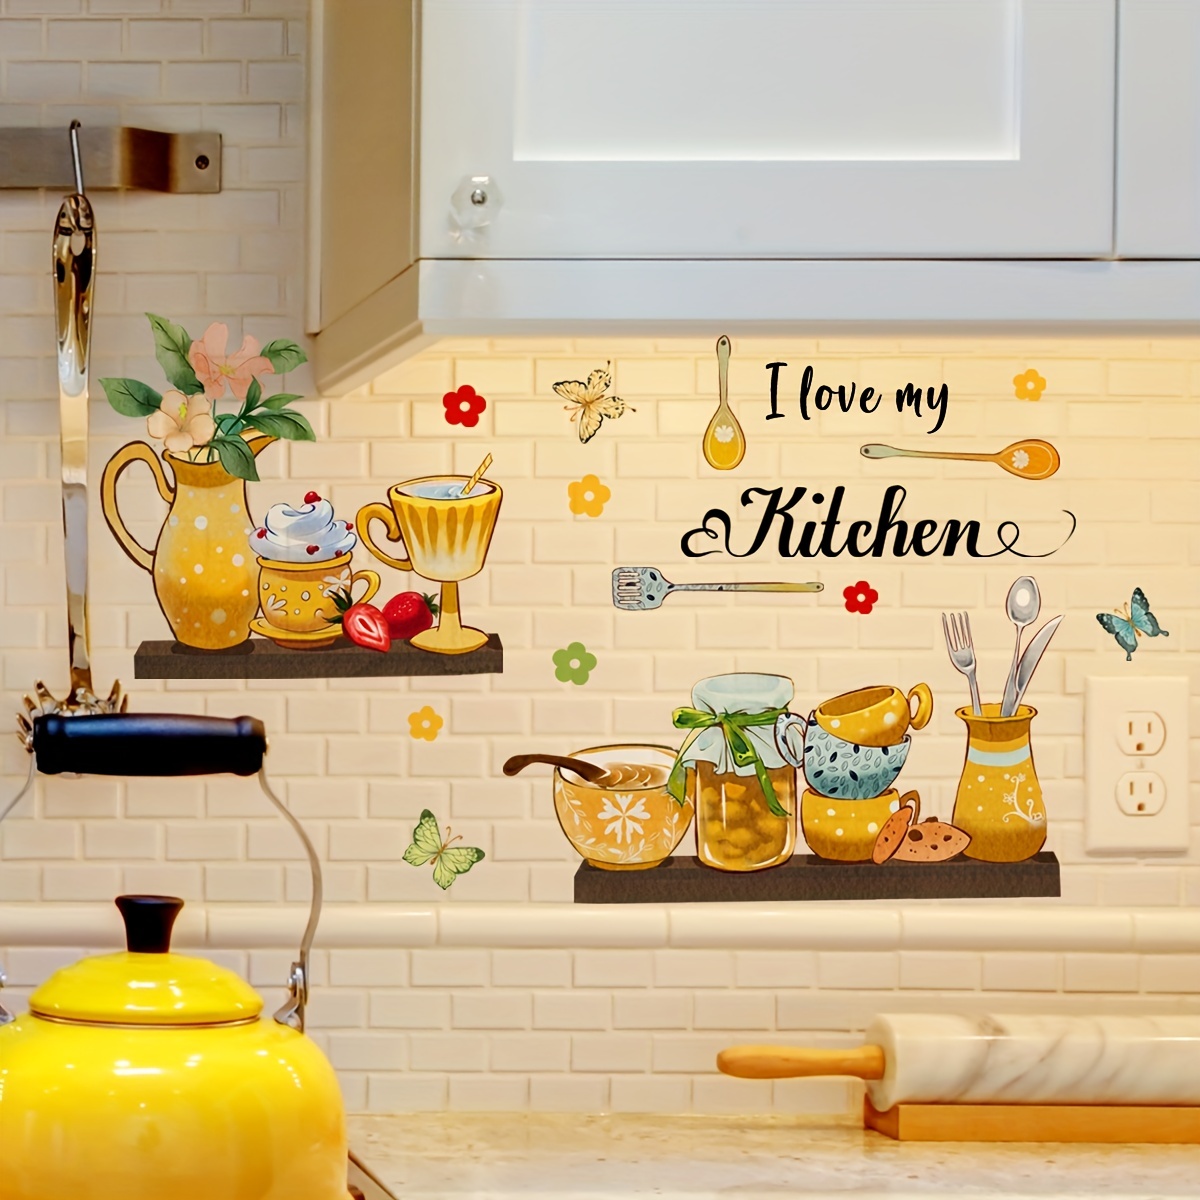 Would love to do this in kitchen wall